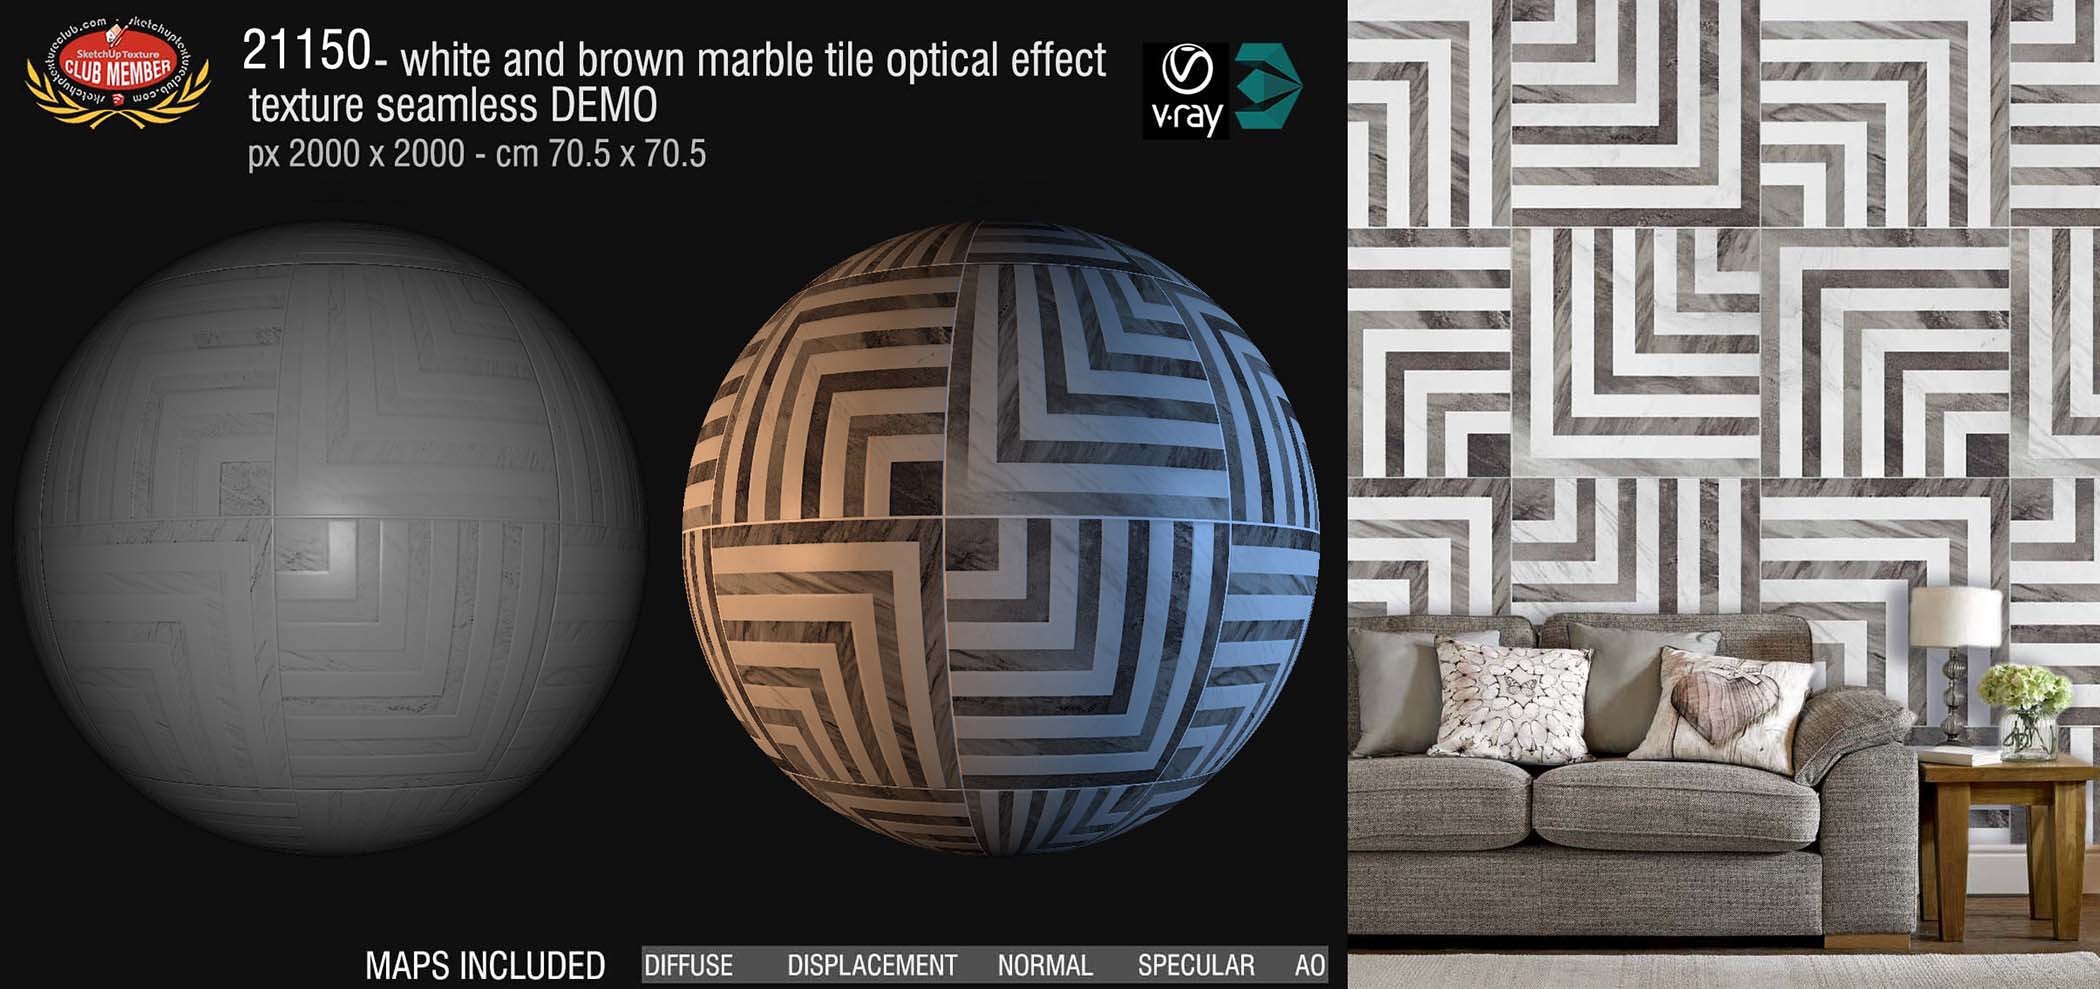 21150  White and brown marble tile optical effect texture + maps DEMO